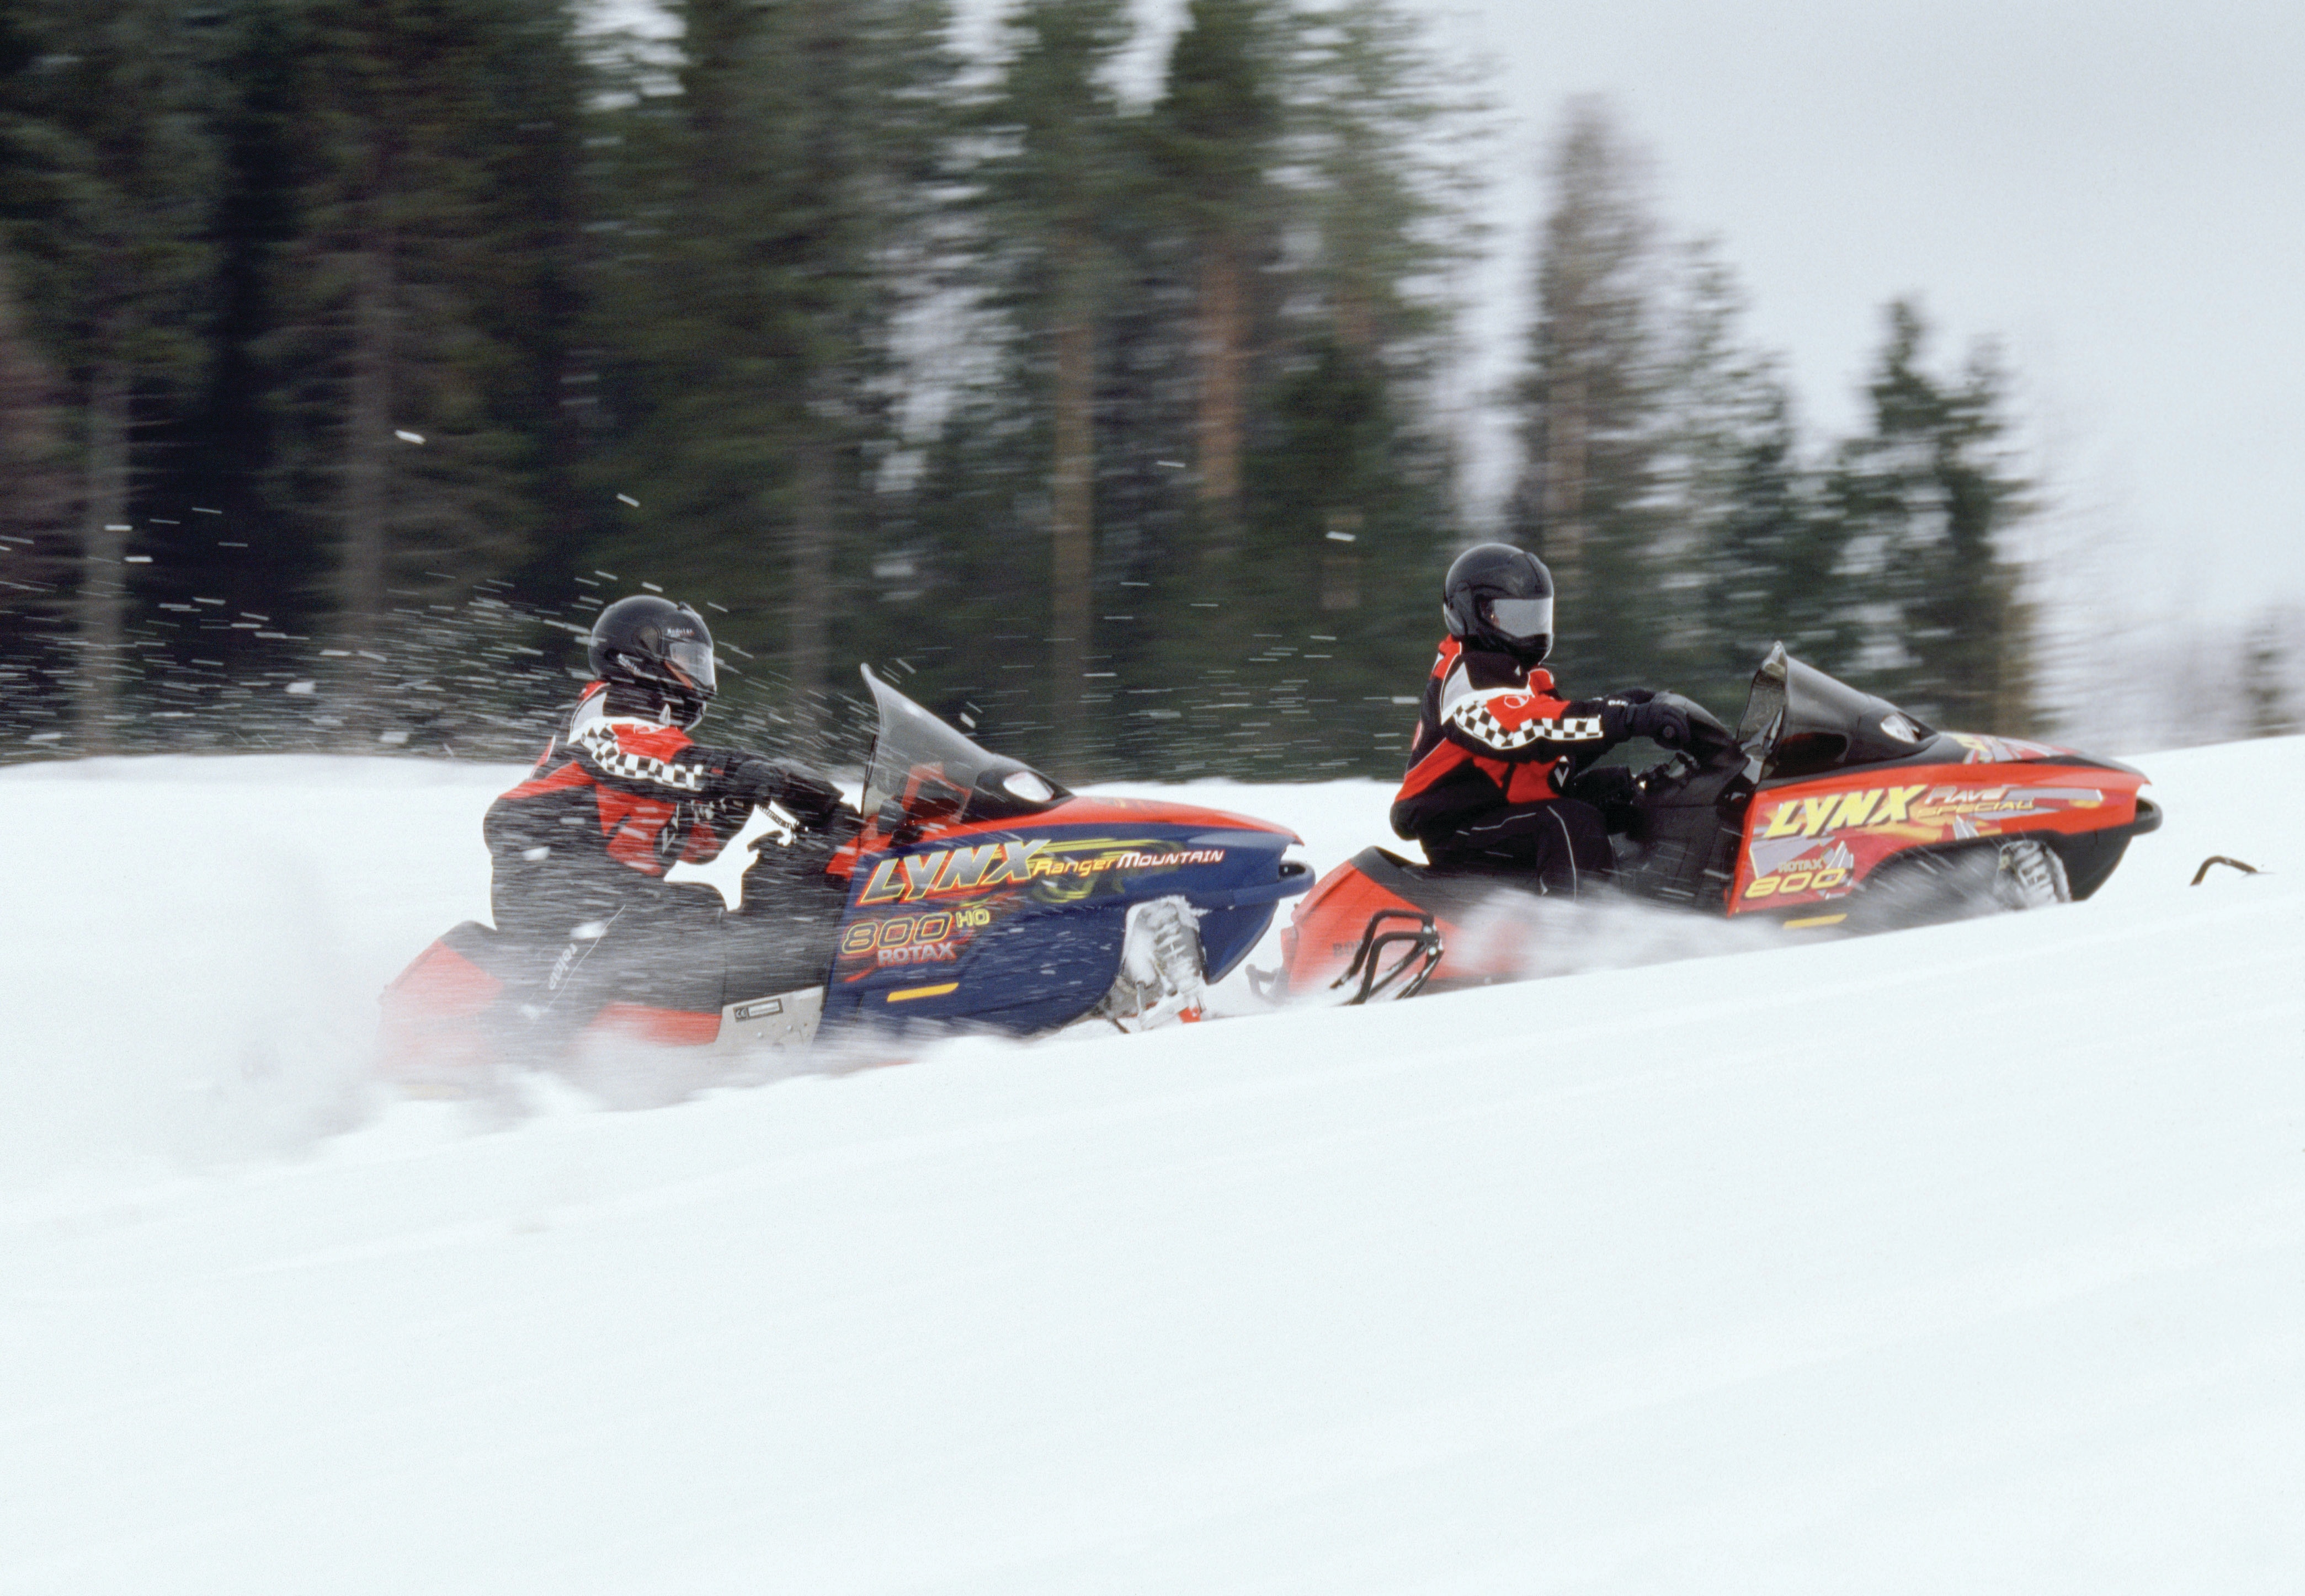 Lynx Rave and Ranger Mountain snowmobiles accelerating uphill